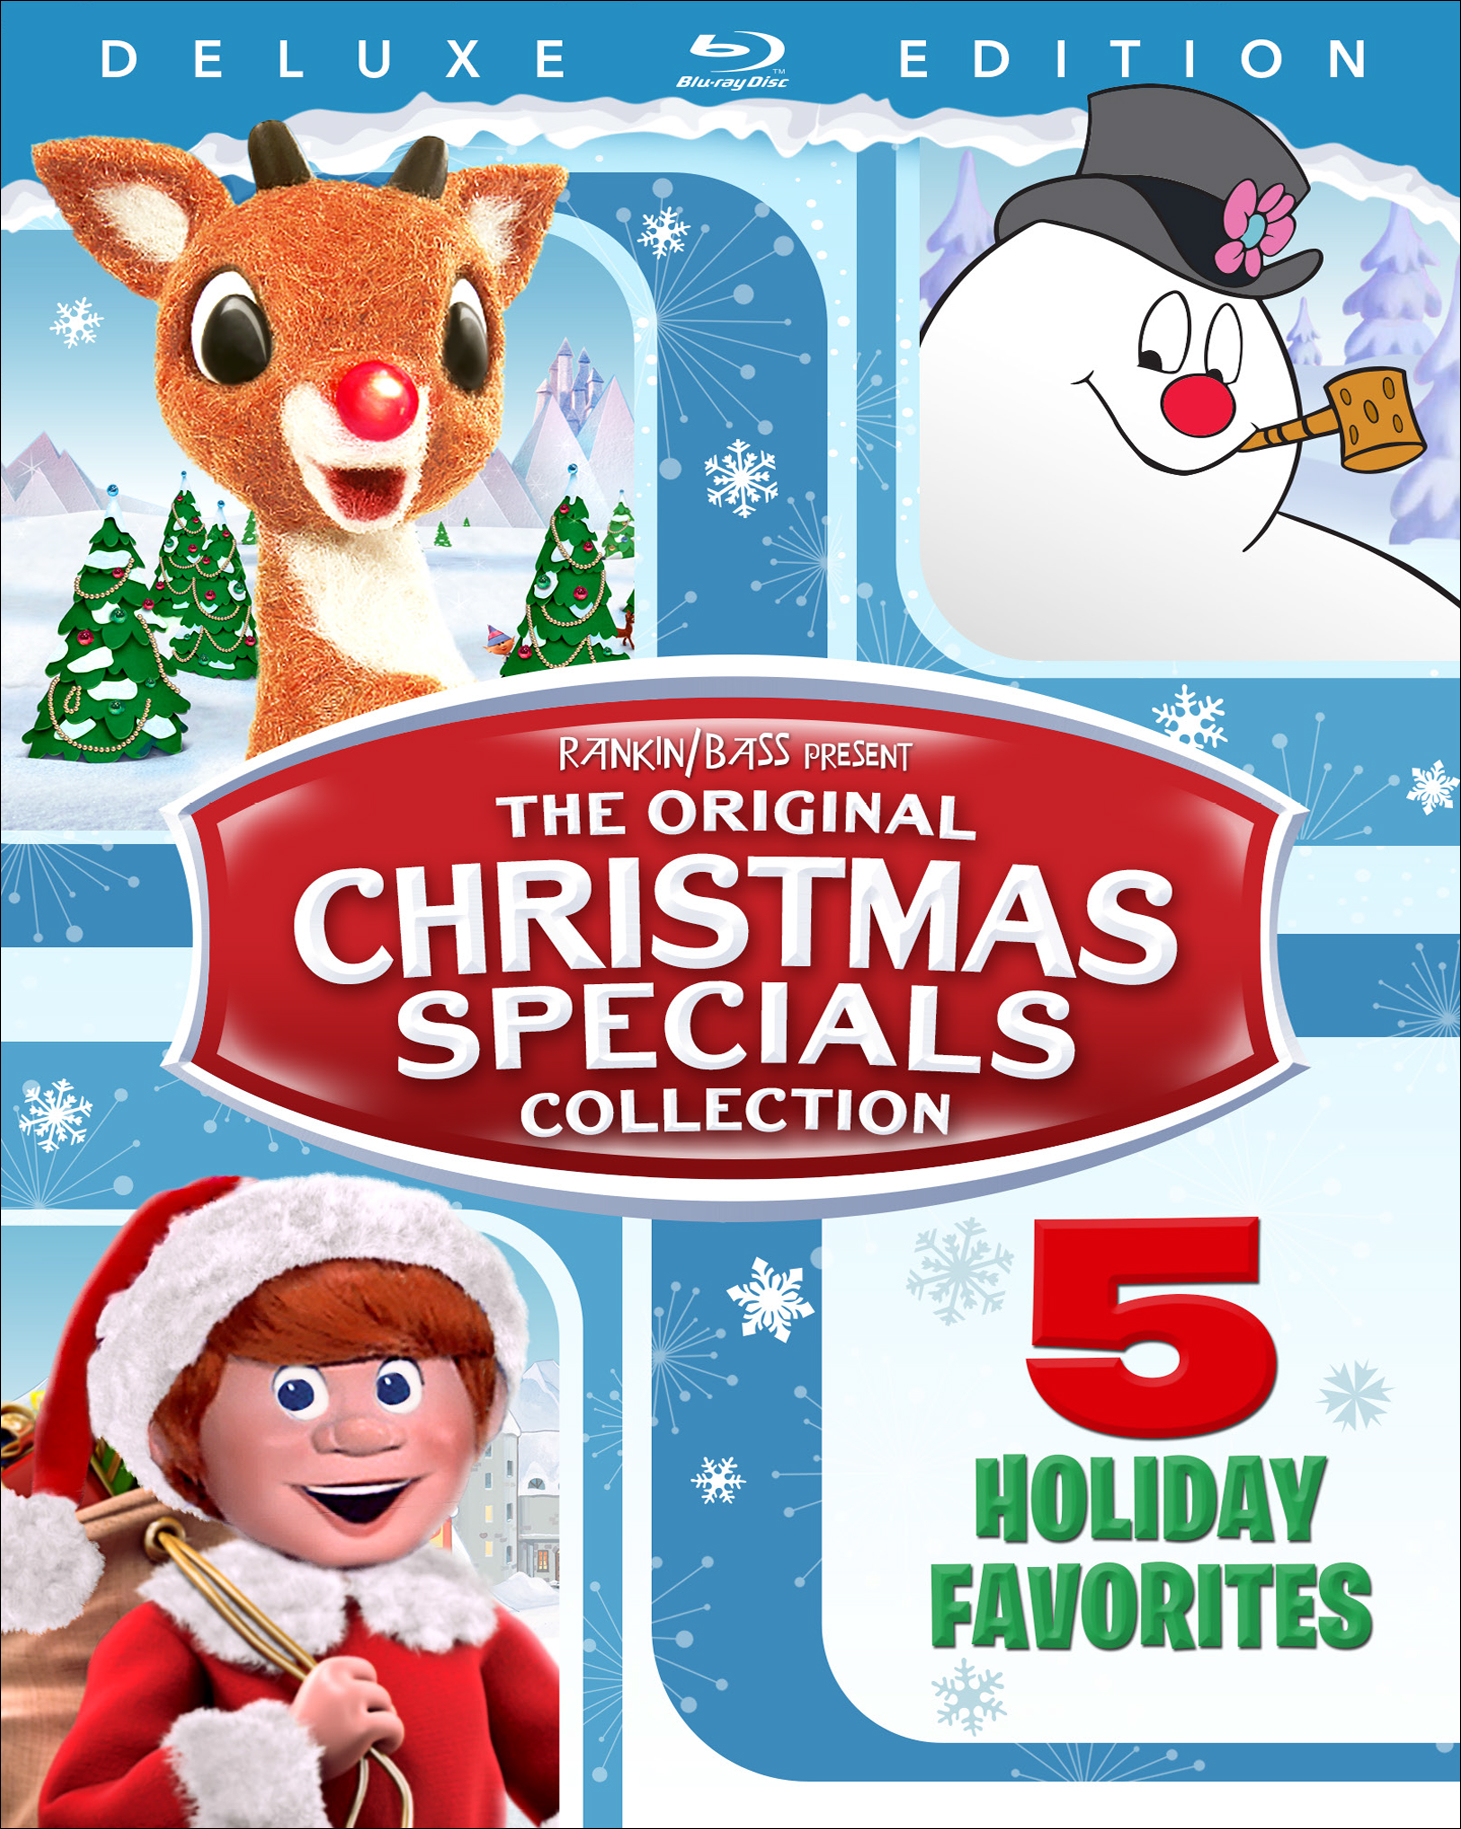 The Original Christmas Specials Collection (Deluxe Edition) - Blu-ray [ 1970 ] - Animation Movies on Blu-ray